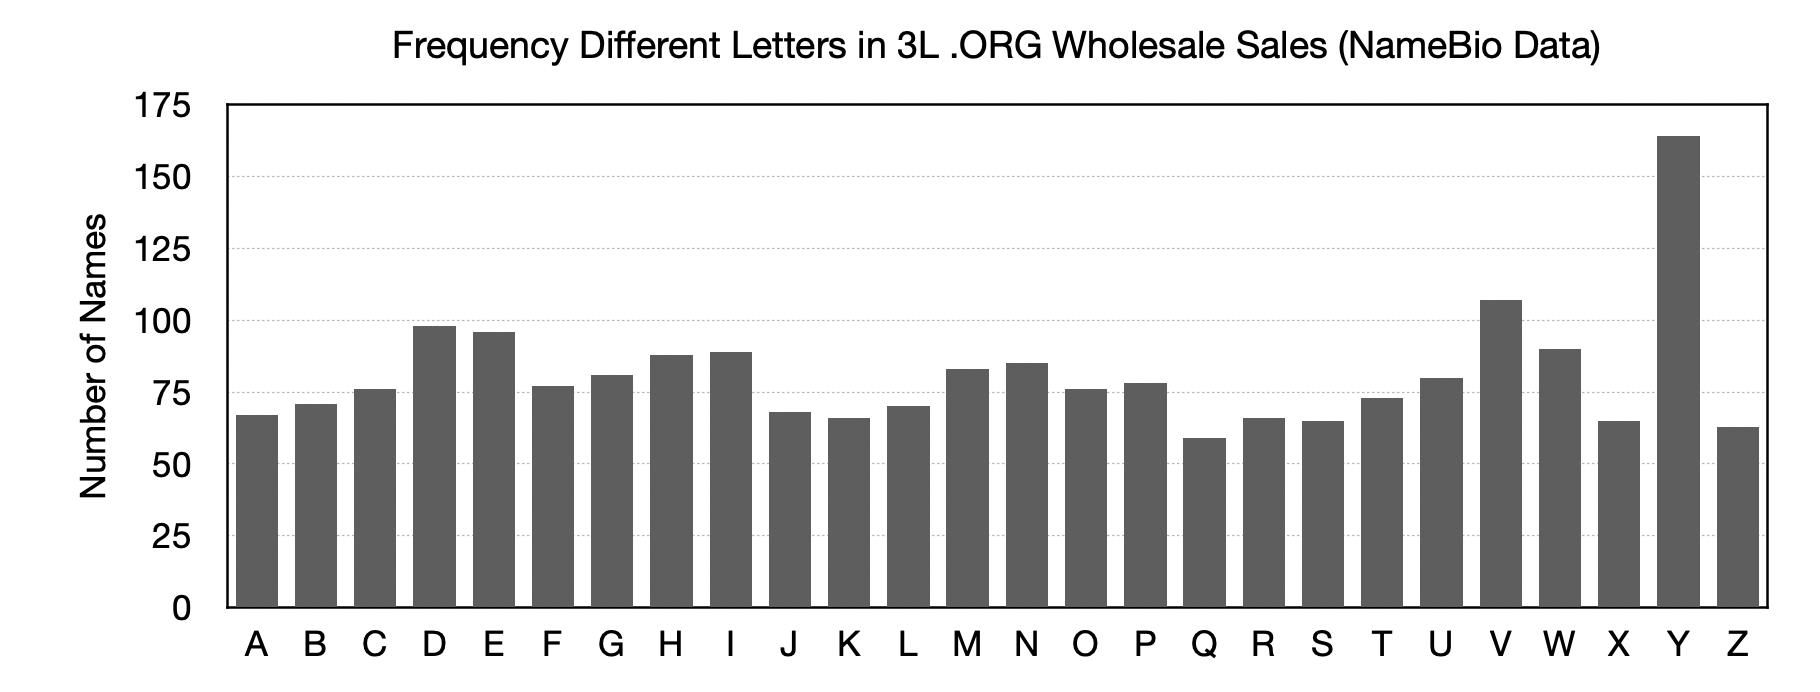 Image-Letters-Wholesale-ORG.png